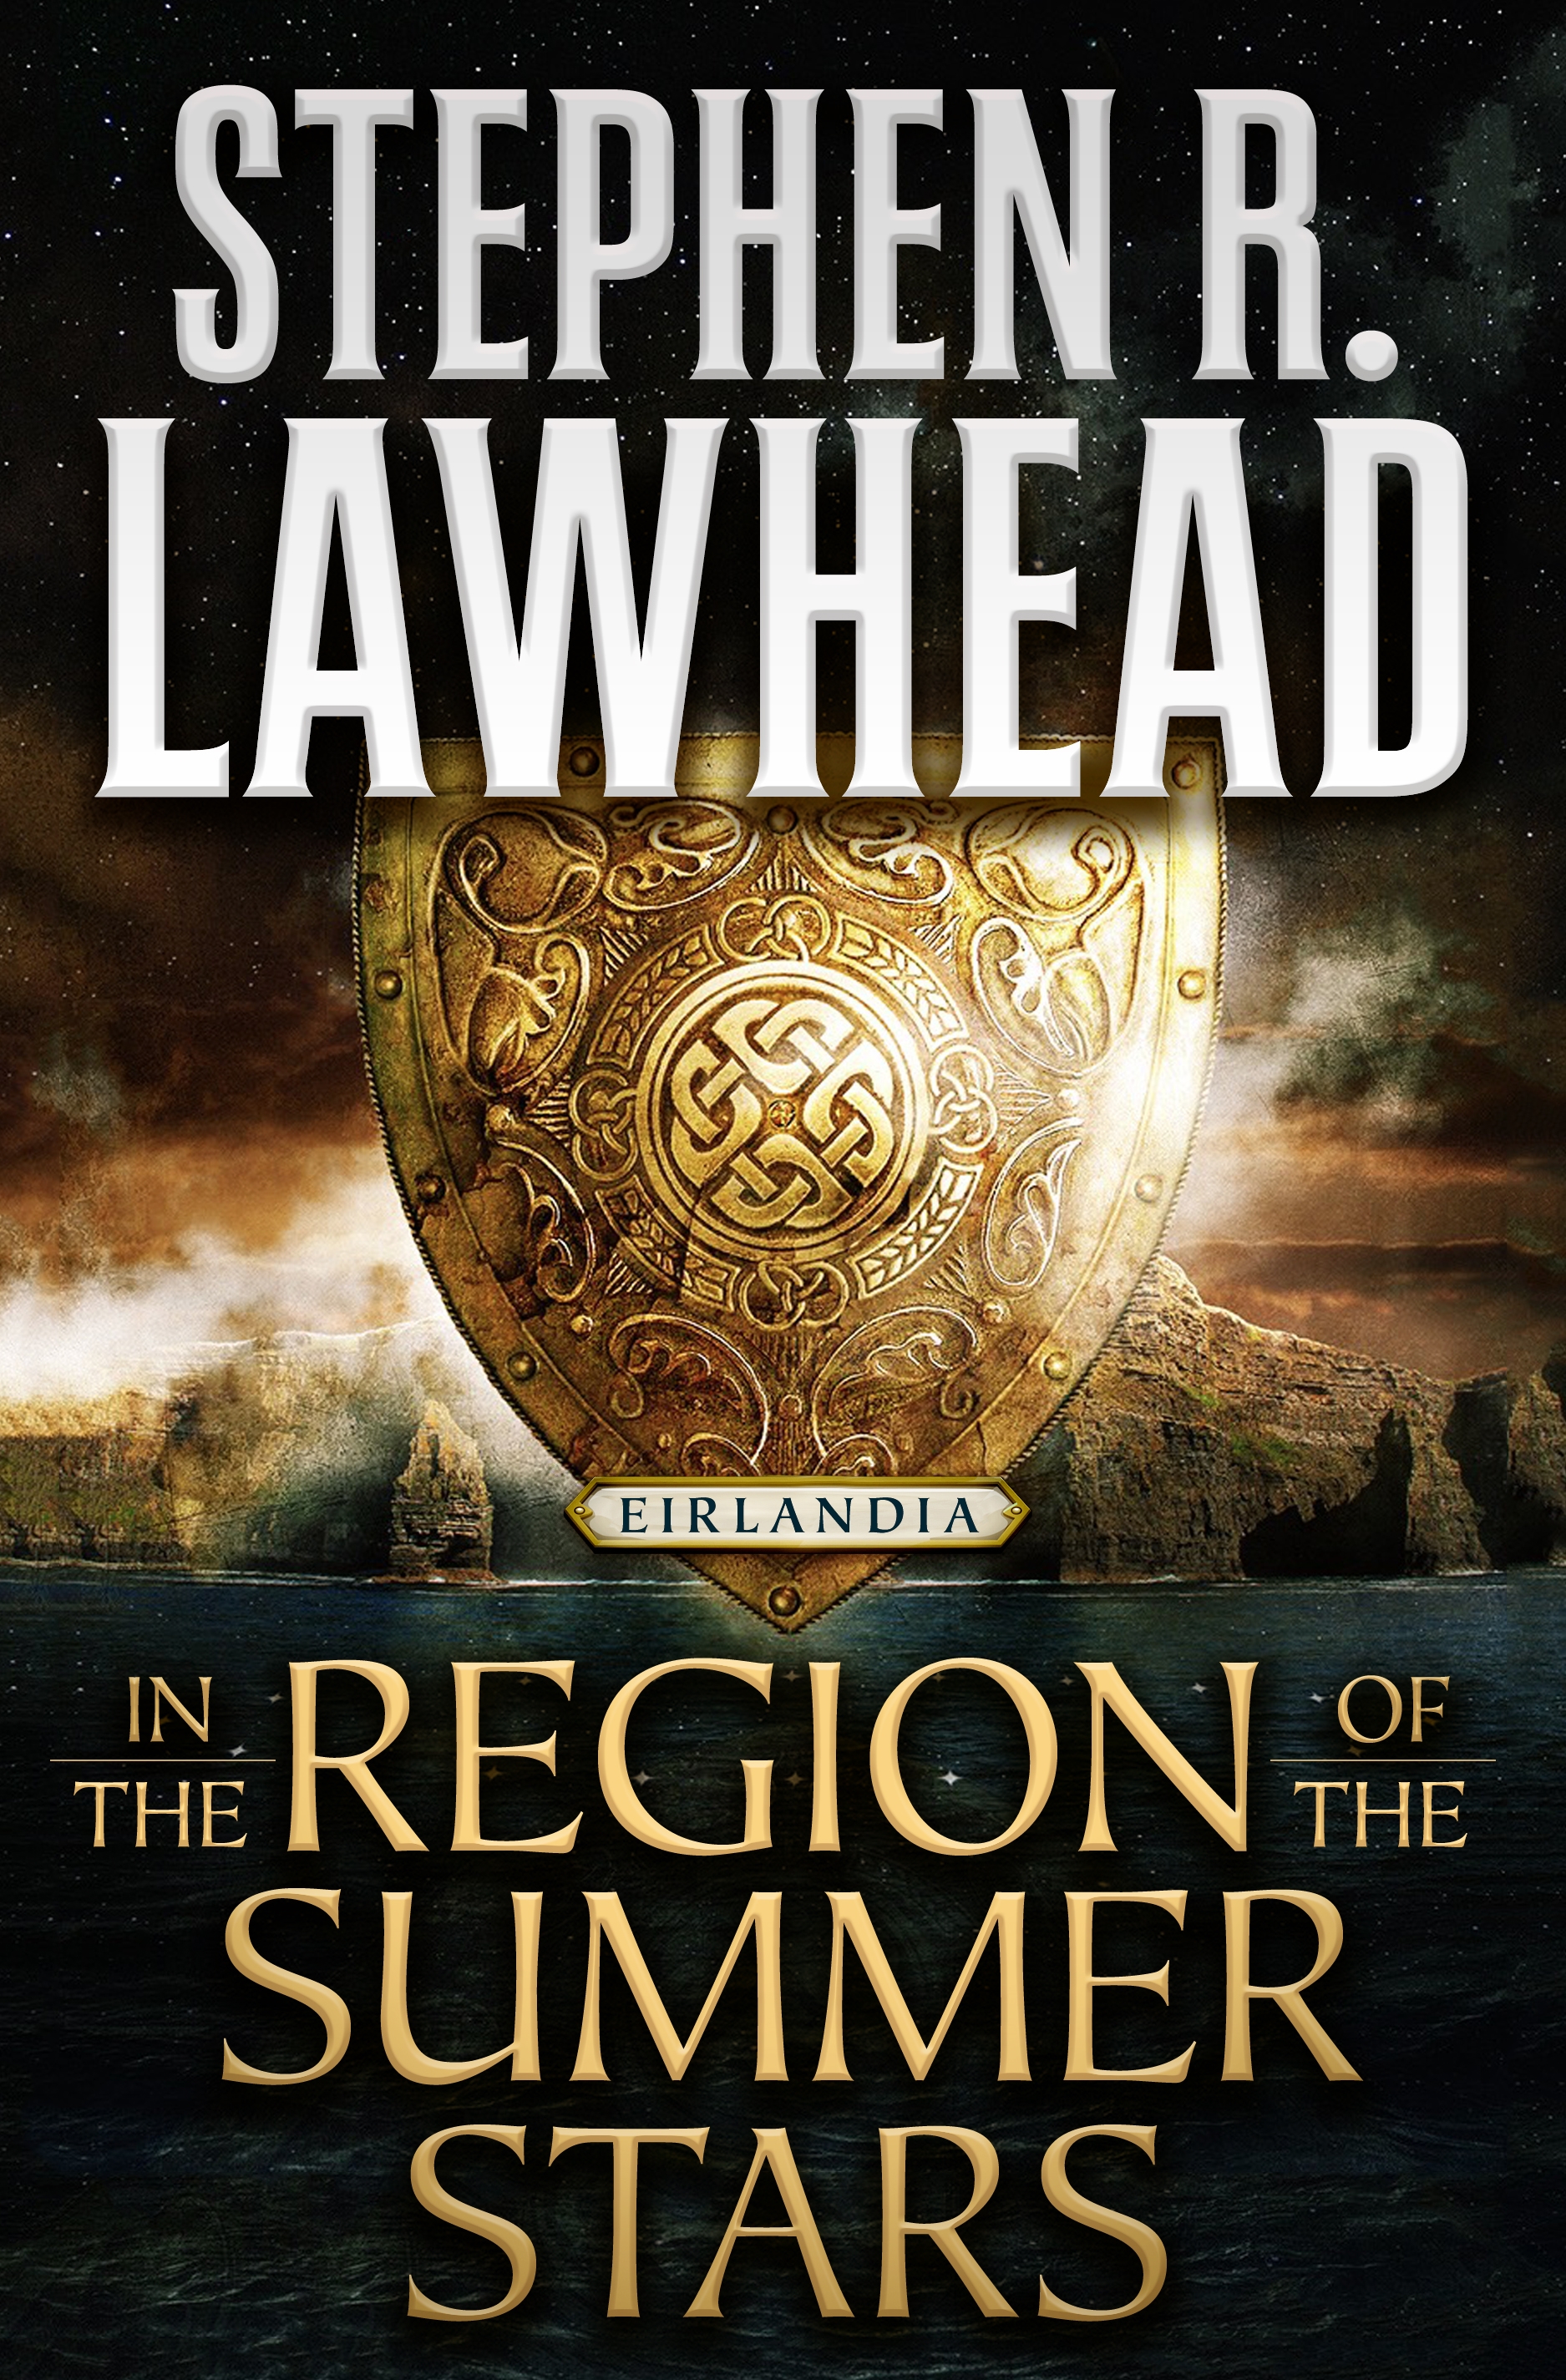 In the Region of the Summer Stars : Eirlandia, Book One by Stephen R. Lawhead